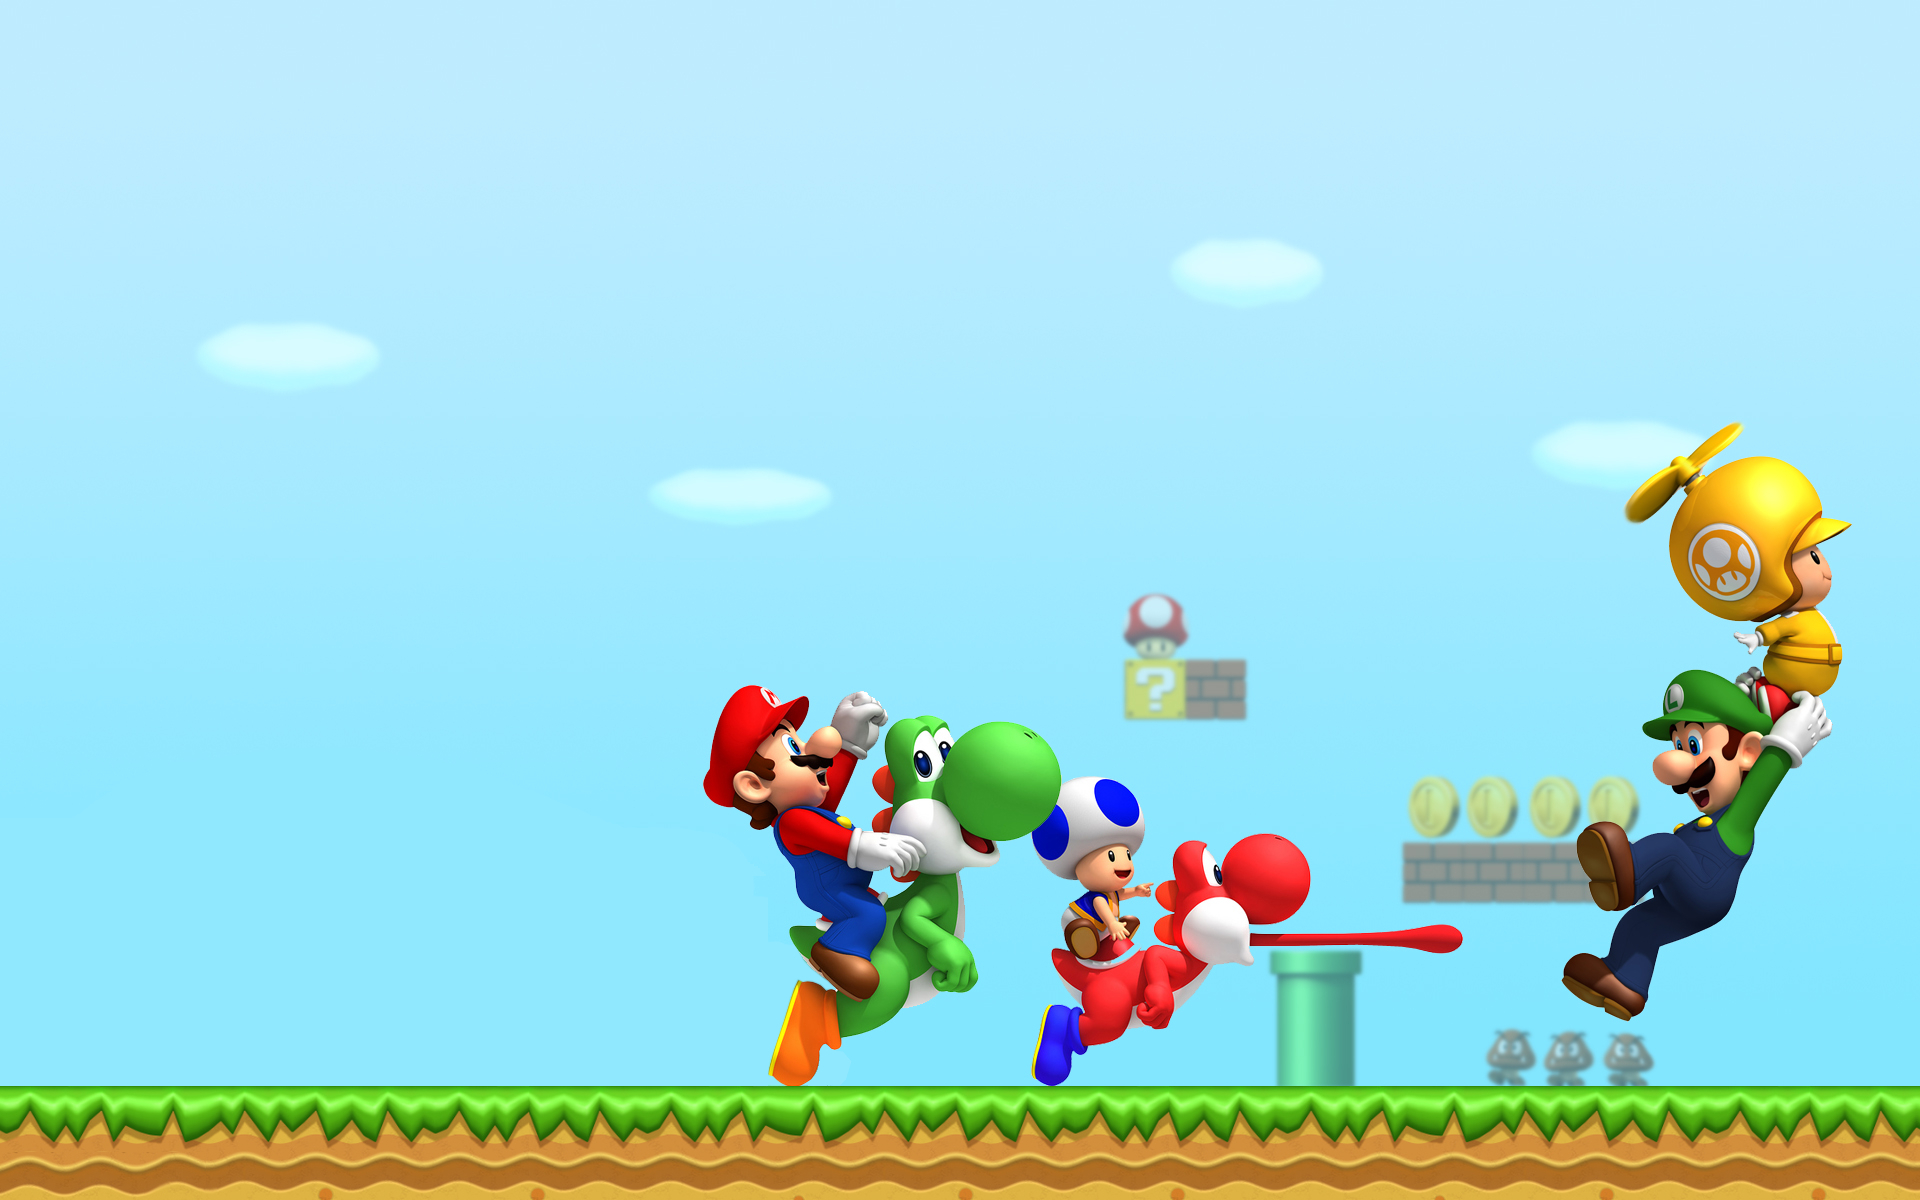 Video Game New Super Mario Bros. Wii HD Wallpaper | Background Image